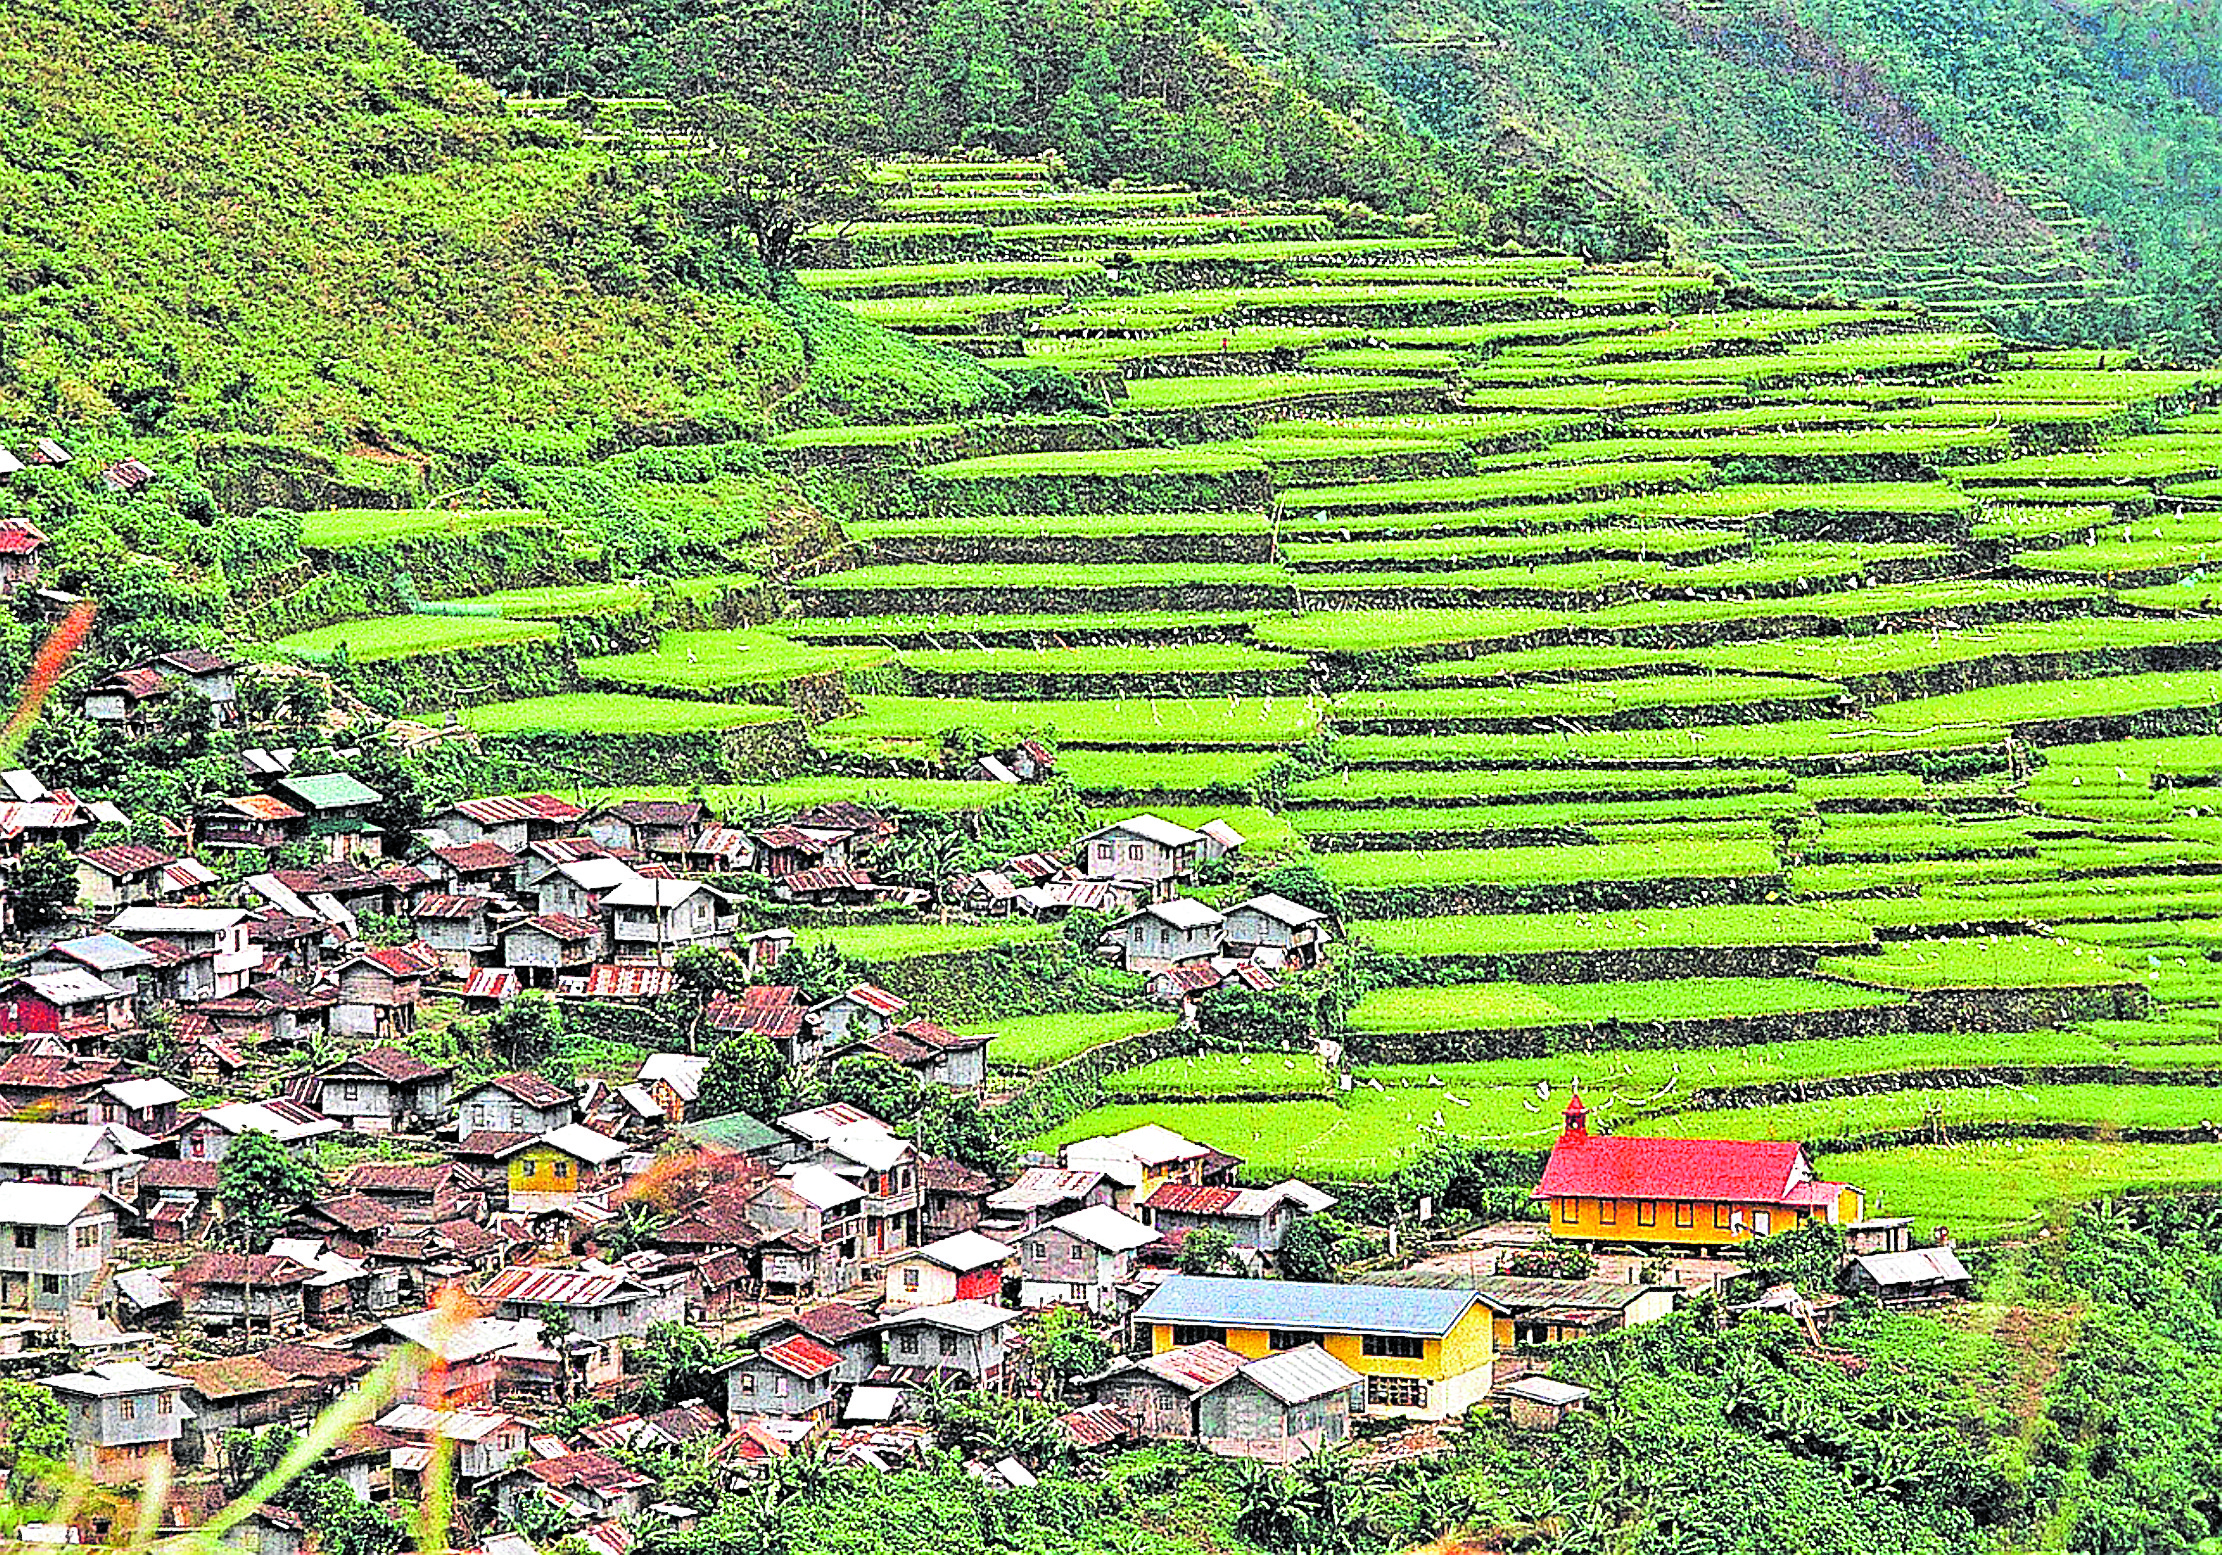 Farming communities in the mountains of the Cordillera suffer from poor telecommunications signal and internet connection due to their terrain.